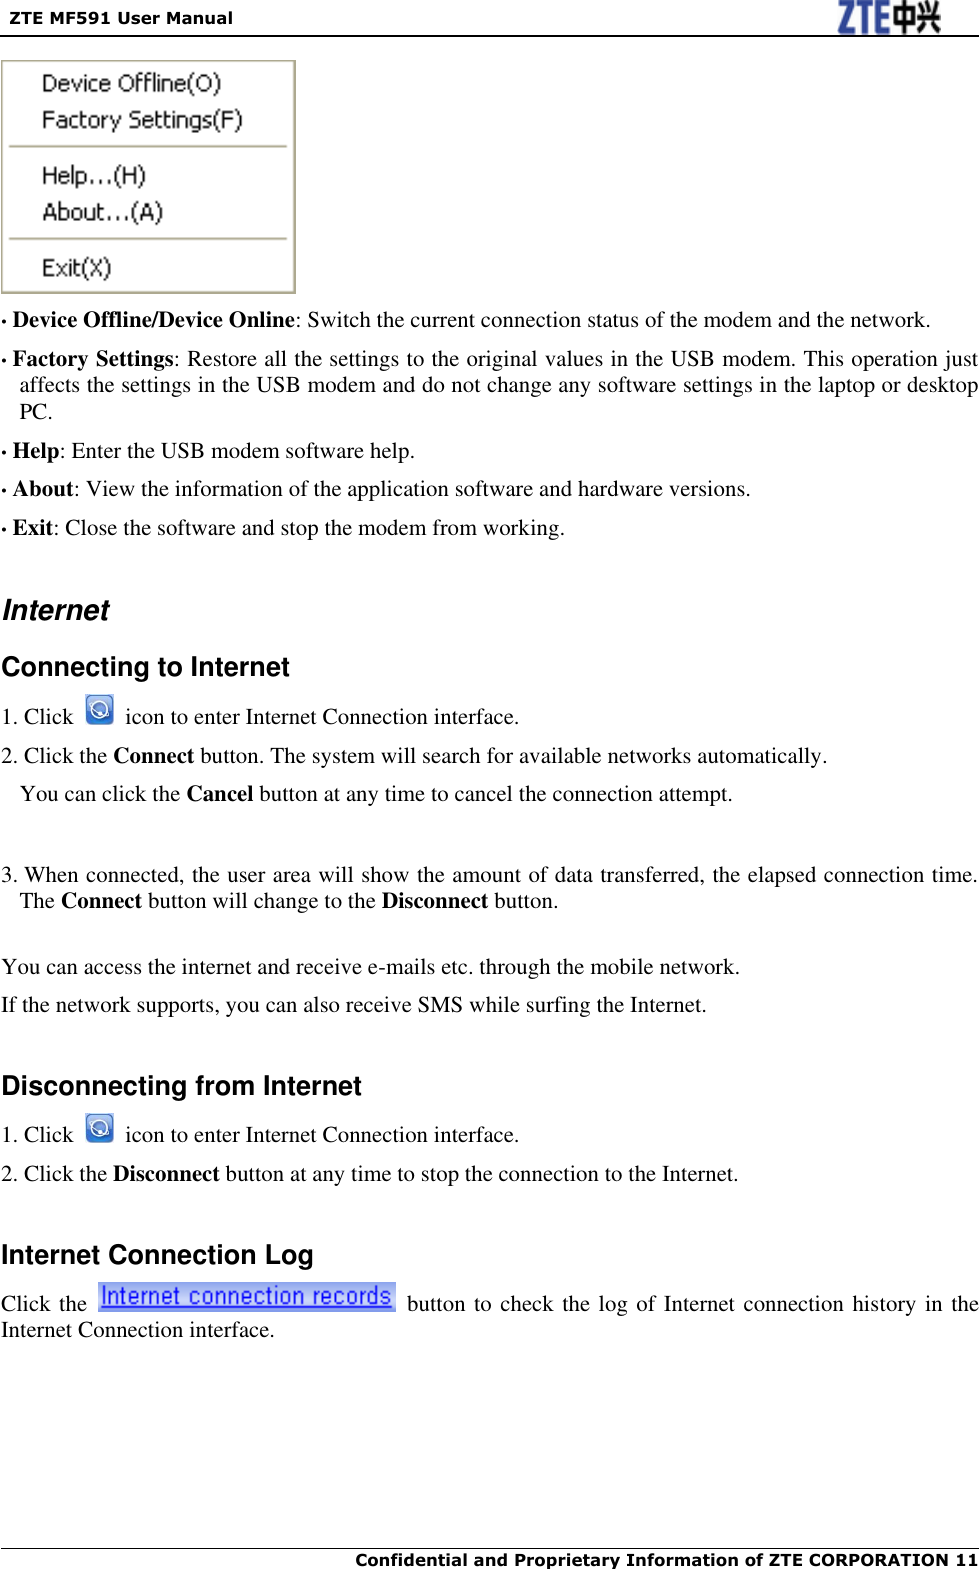   ZTE MF591 User Manual  Confidential and Proprietary Information of ZTE CORPORATION 11    • Device Offline/Device Online: Switch the current connection status of the modem and the network. • Factory Settings: Restore all the settings to the original values in the USB modem. This operation just affects the settings in the USB modem and do not change any software settings in the laptop or desktop PC. • Help: Enter the USB modem software help. • About: View the information of the application software and hardware versions. • Exit: Close the software and stop the modem from working.  Internet Connecting to Internet 1. Click    icon to enter Internet Connection interface. 2. Click the Connect button. The system will search for available networks automatically. You can click the Cancel button at any time to cancel the connection attempt.   3. When connected, the user area will show the amount of data transferred, the elapsed connection time. The Connect button will change to the Disconnect button.  You can access the internet and receive e-mails etc. through the mobile network. If the network supports, you can also receive SMS while surfing the Internet.  Disconnecting from Internet 1. Click    icon to enter Internet Connection interface. 2. Click the Disconnect button at any time to stop the connection to the Internet.  Internet Connection Log Click the    button to check the log of Internet connection history in the Internet Connection interface. 